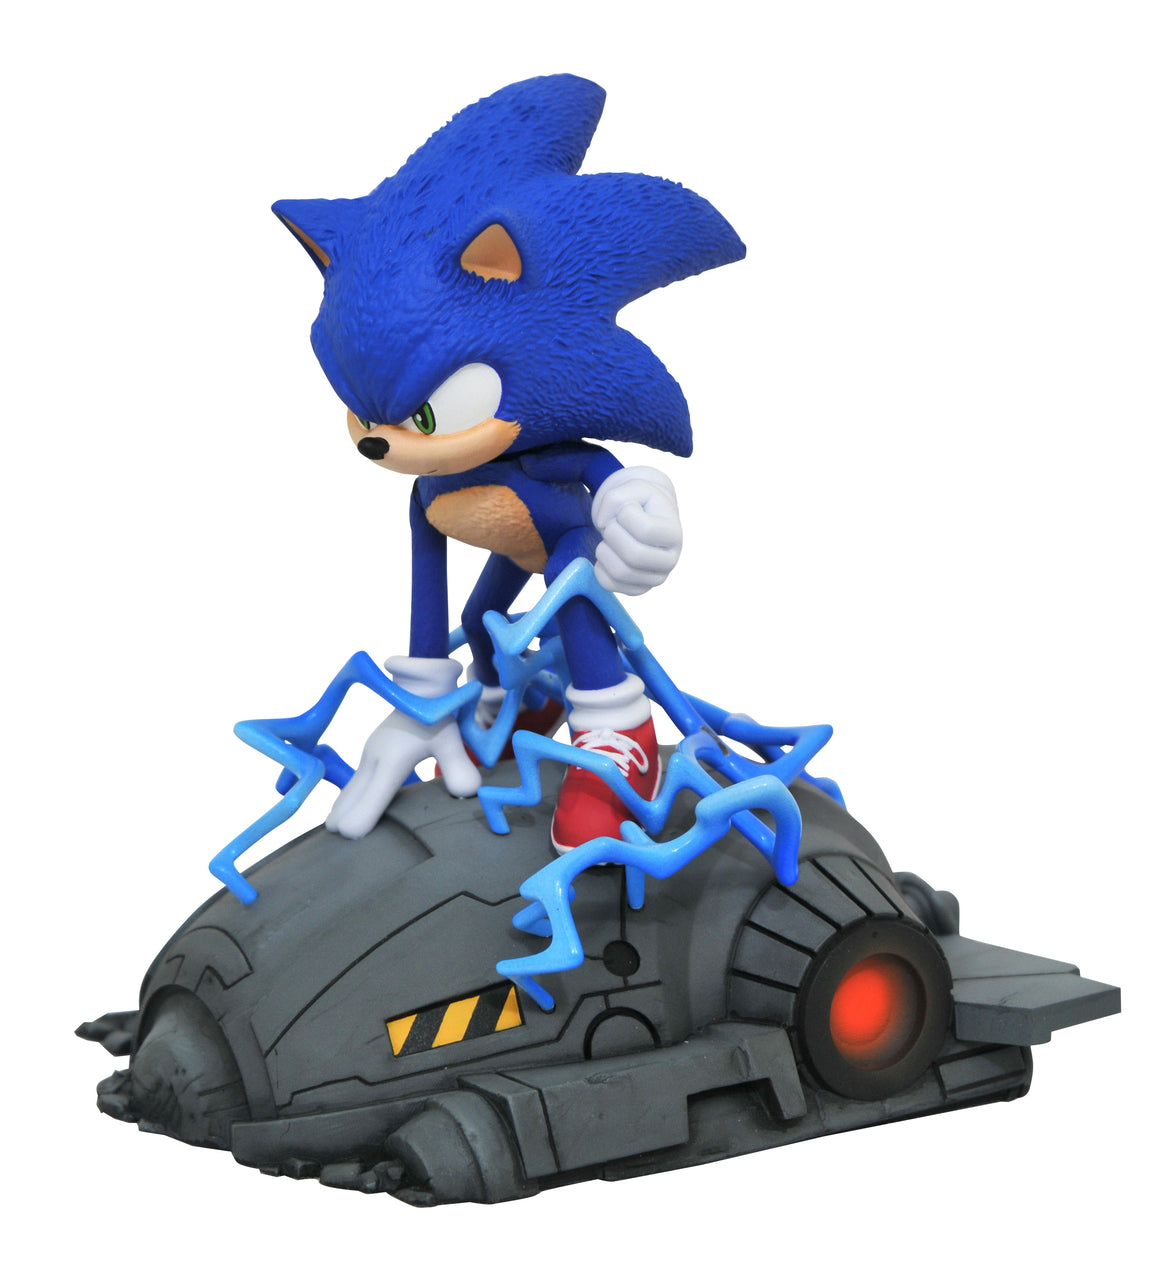 Diamond Select Toys Sonic the Hedgehog Movie Sonic Gallery 5-in Statue   Based on the hit movies, this 5-inch sculpture shows Sonic standing on one  of Dr. Robotnik's drones, about to take